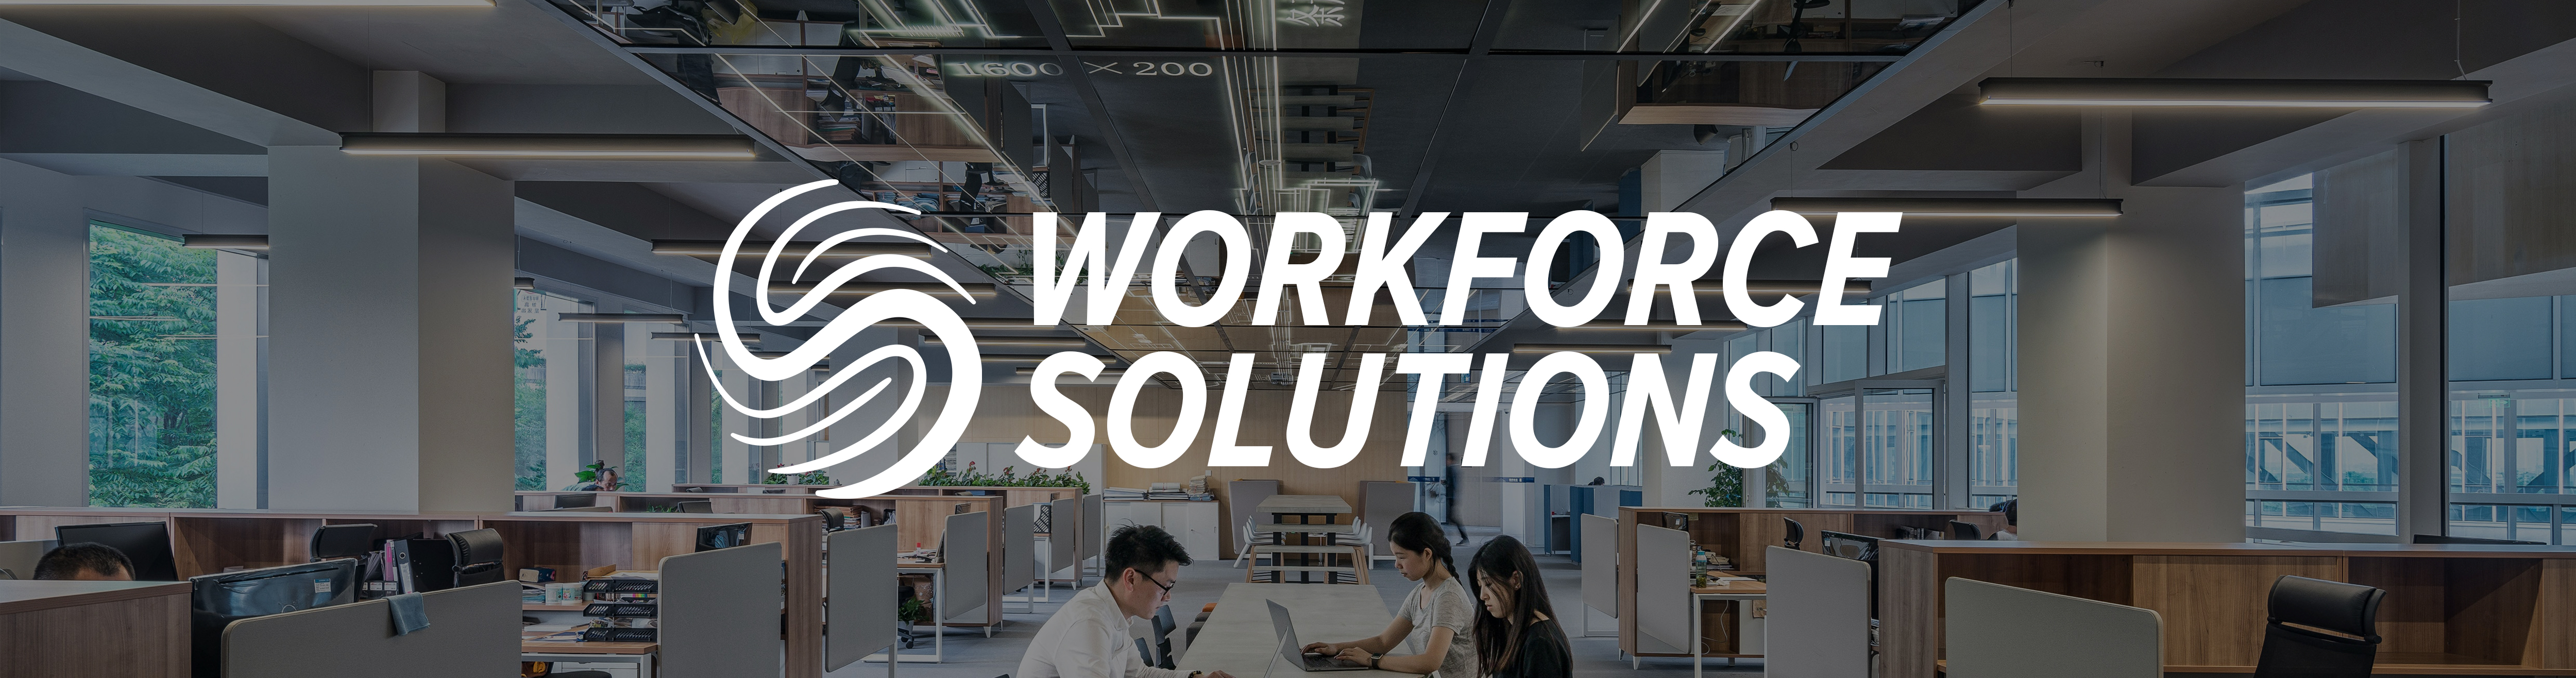 Professional Workforce Solutions, Specialized Recruiting Group